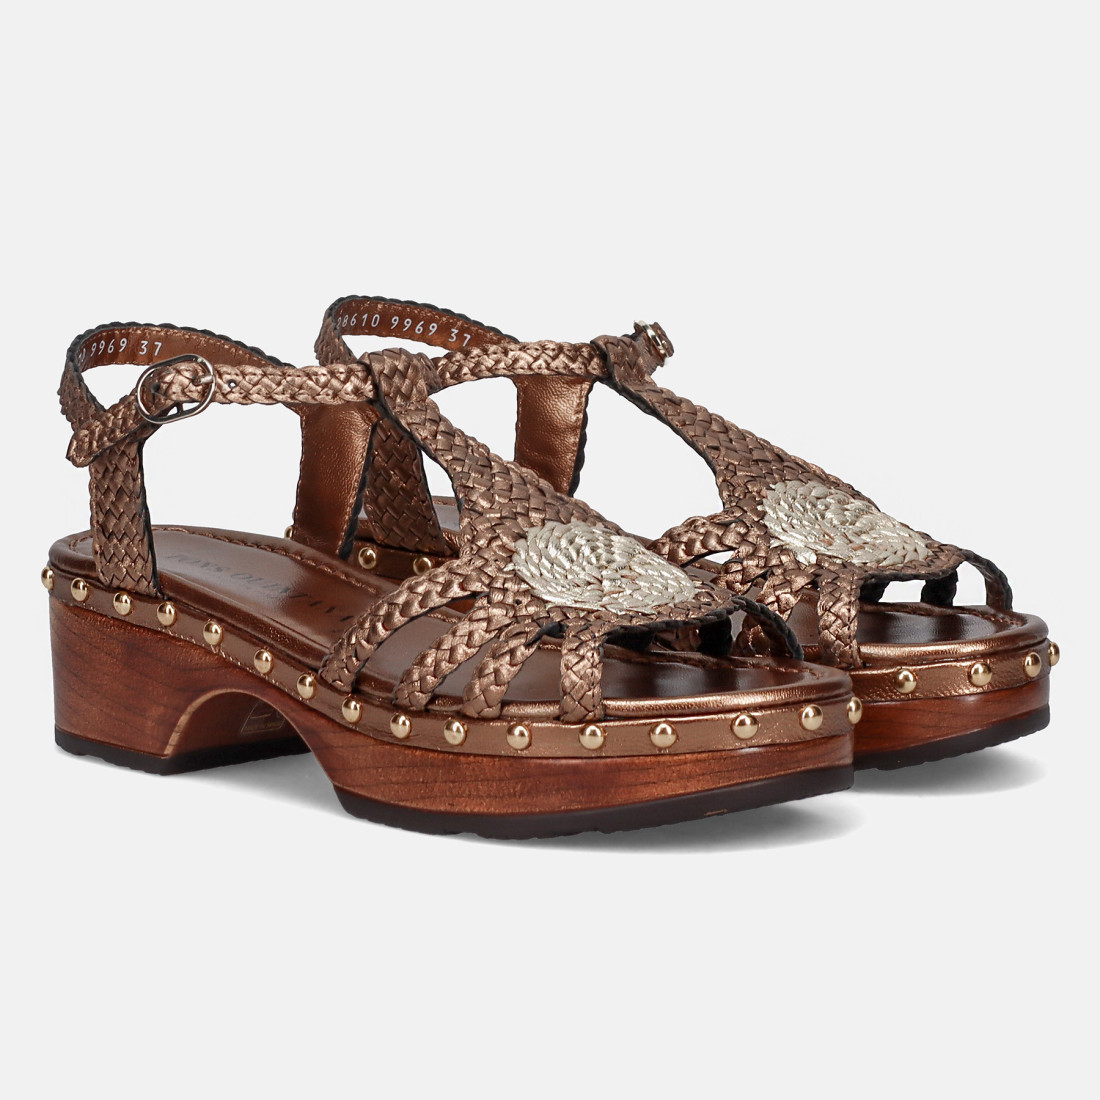 Bronze Pons Quintana Sabina clogs in woven leather